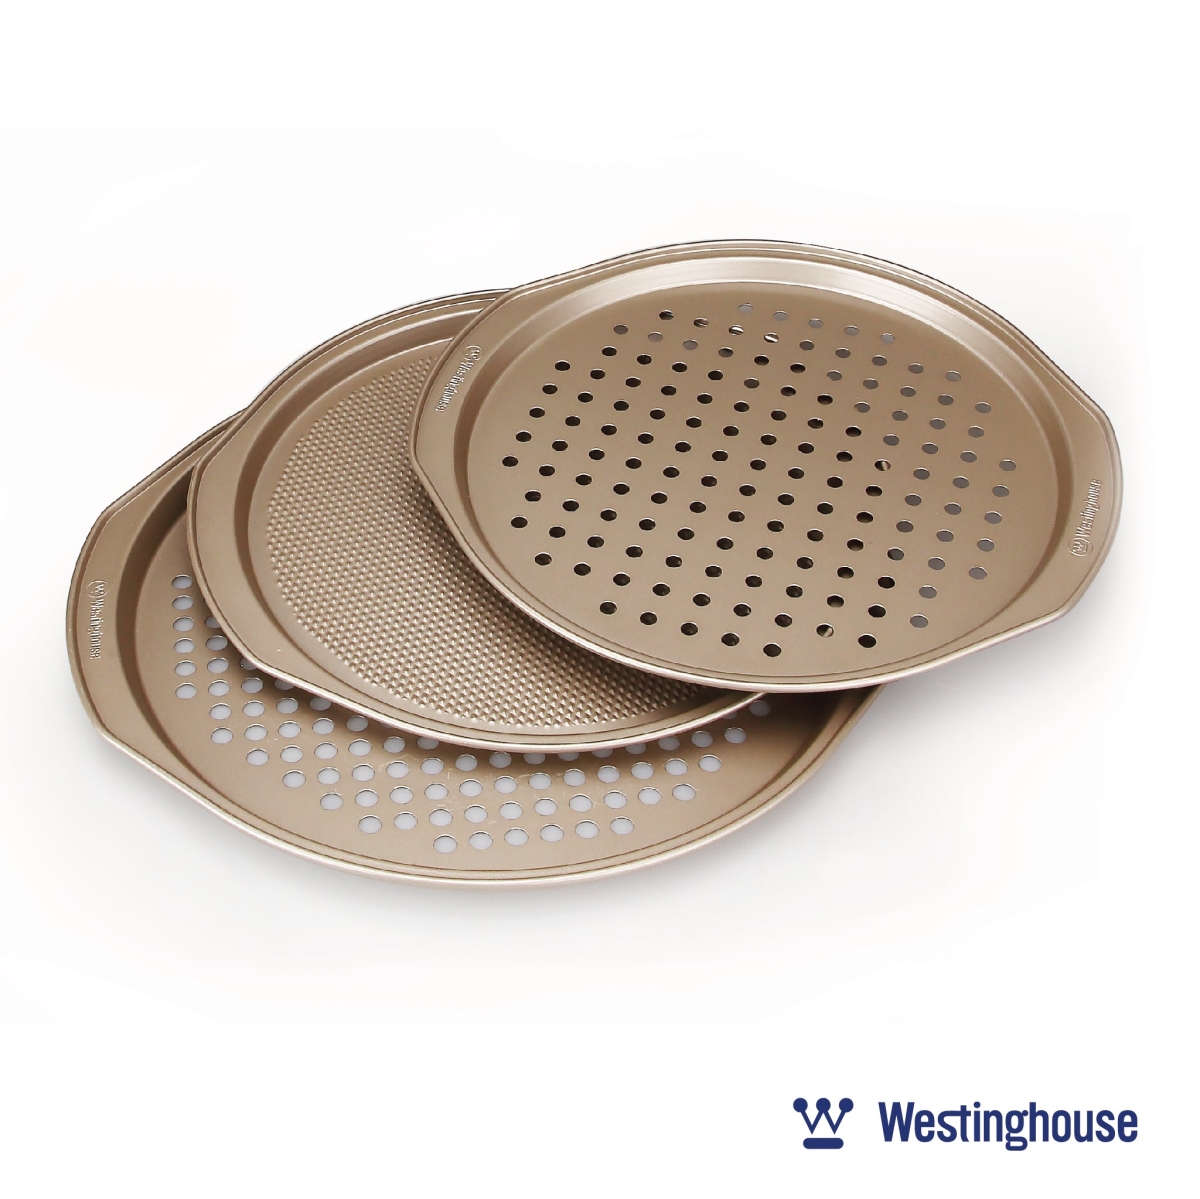 Picture of Westinghouse WH-1 Carbon Steel Pizza Pan Set with 2 x 12 in. Plus 1 x 14 in. Pizza Pans & Premium Non-Stick Coating - 3 Piece